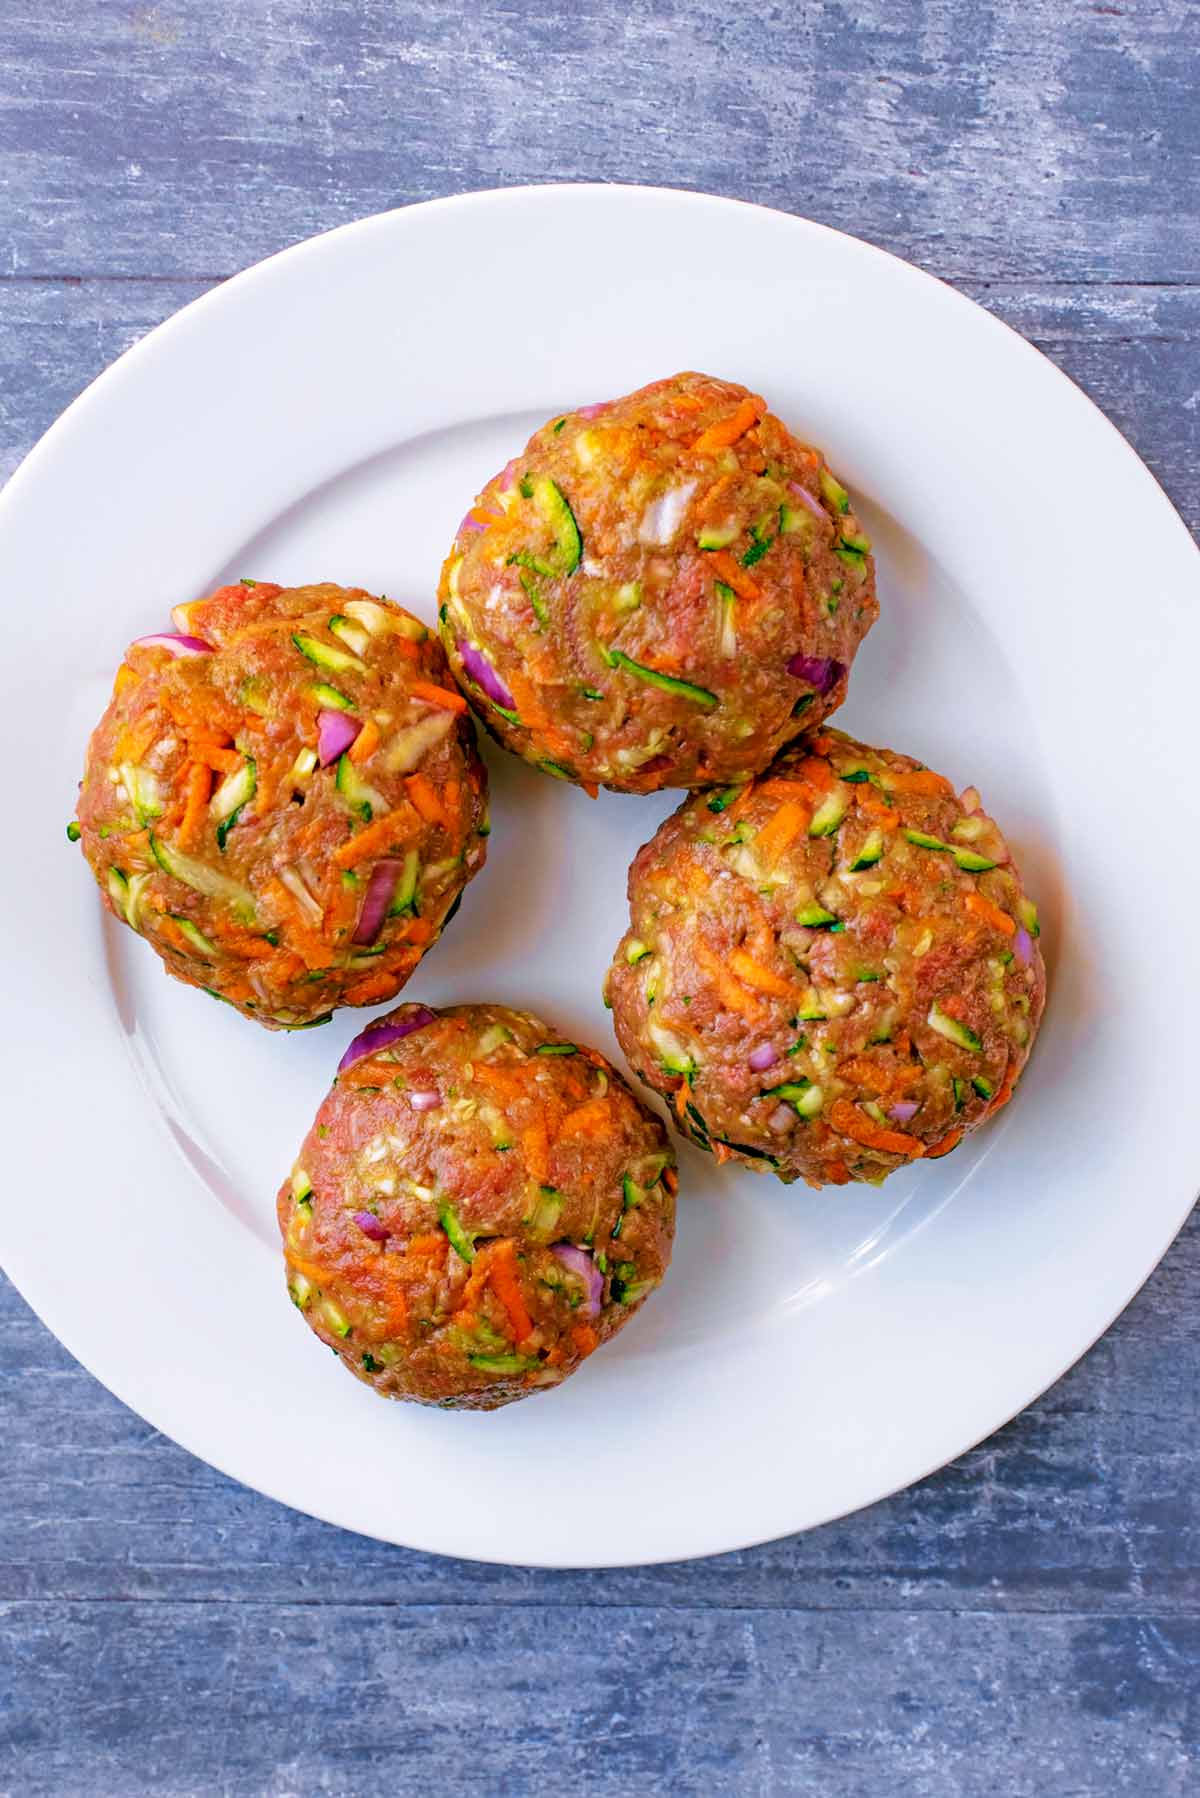 four uncooked beef and vegetable burger patties on a white plate.